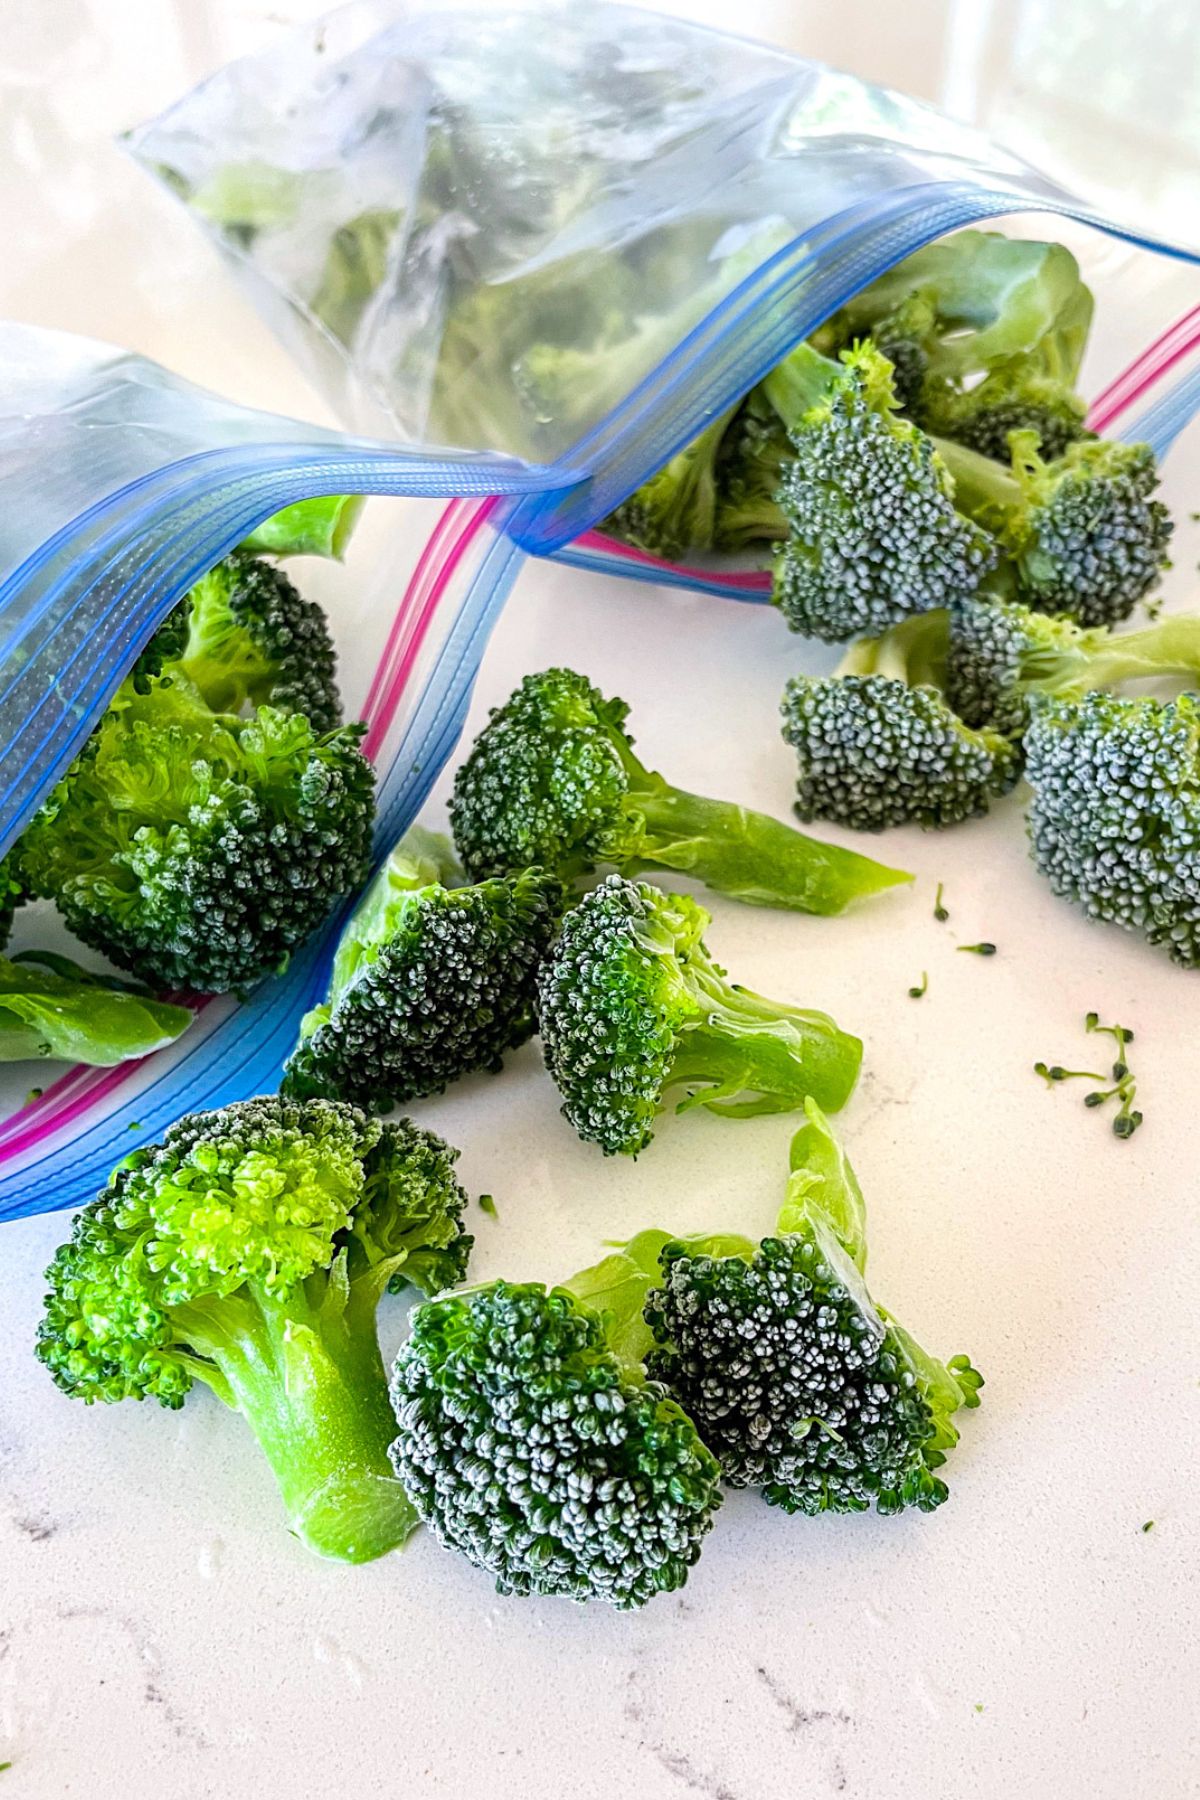 How to Freeze Broccoli – Blanched & Unblanched